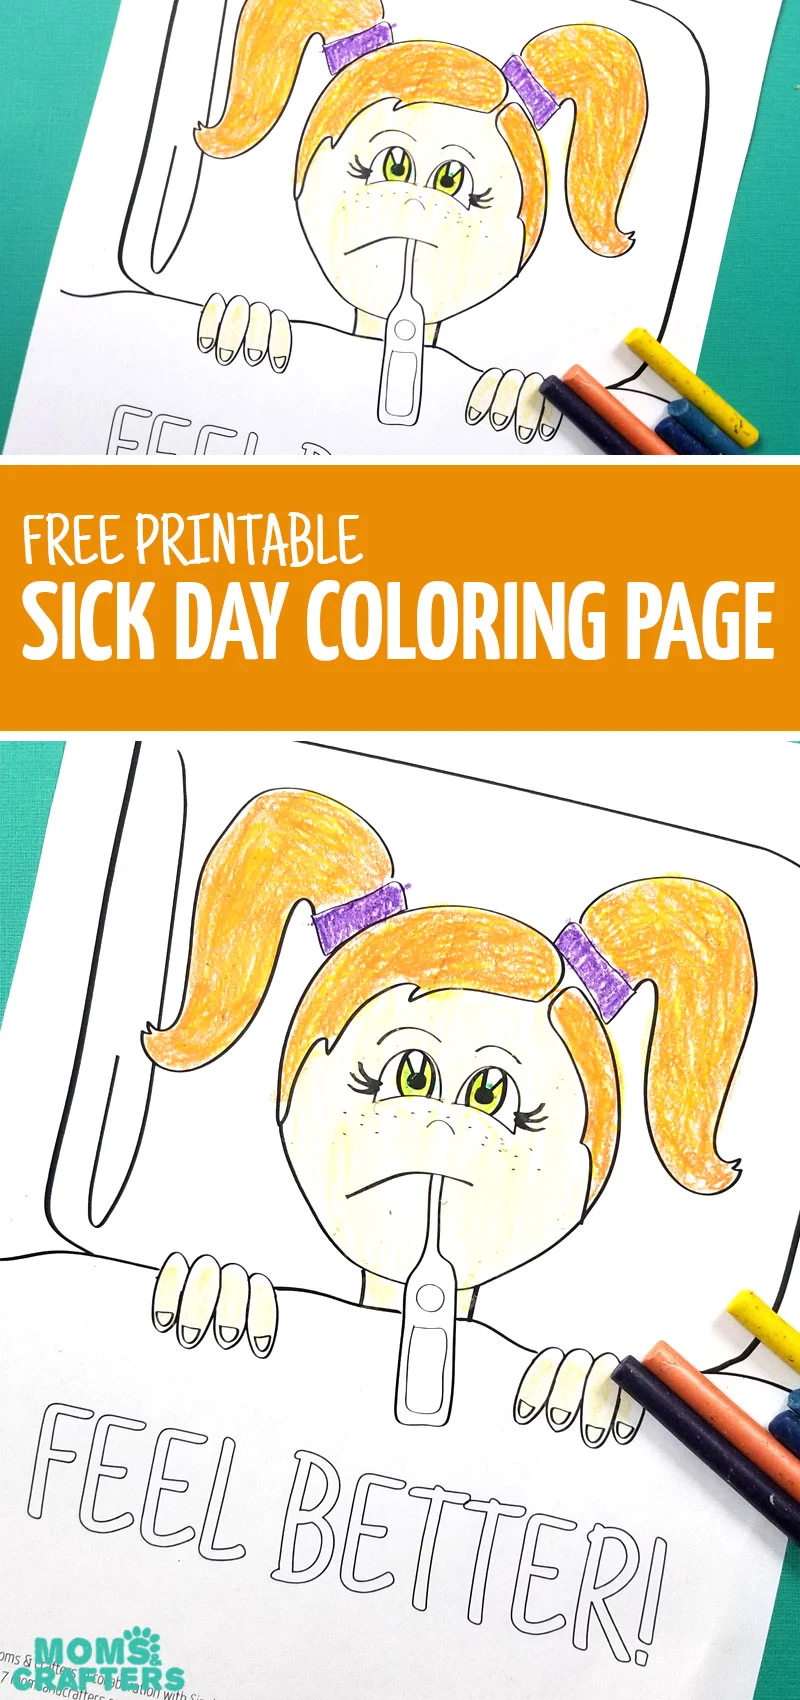 Click to download this FREE printable coloring page for kids - a perfect activity for sick days! #coloring #kidsactivities #freeprintable